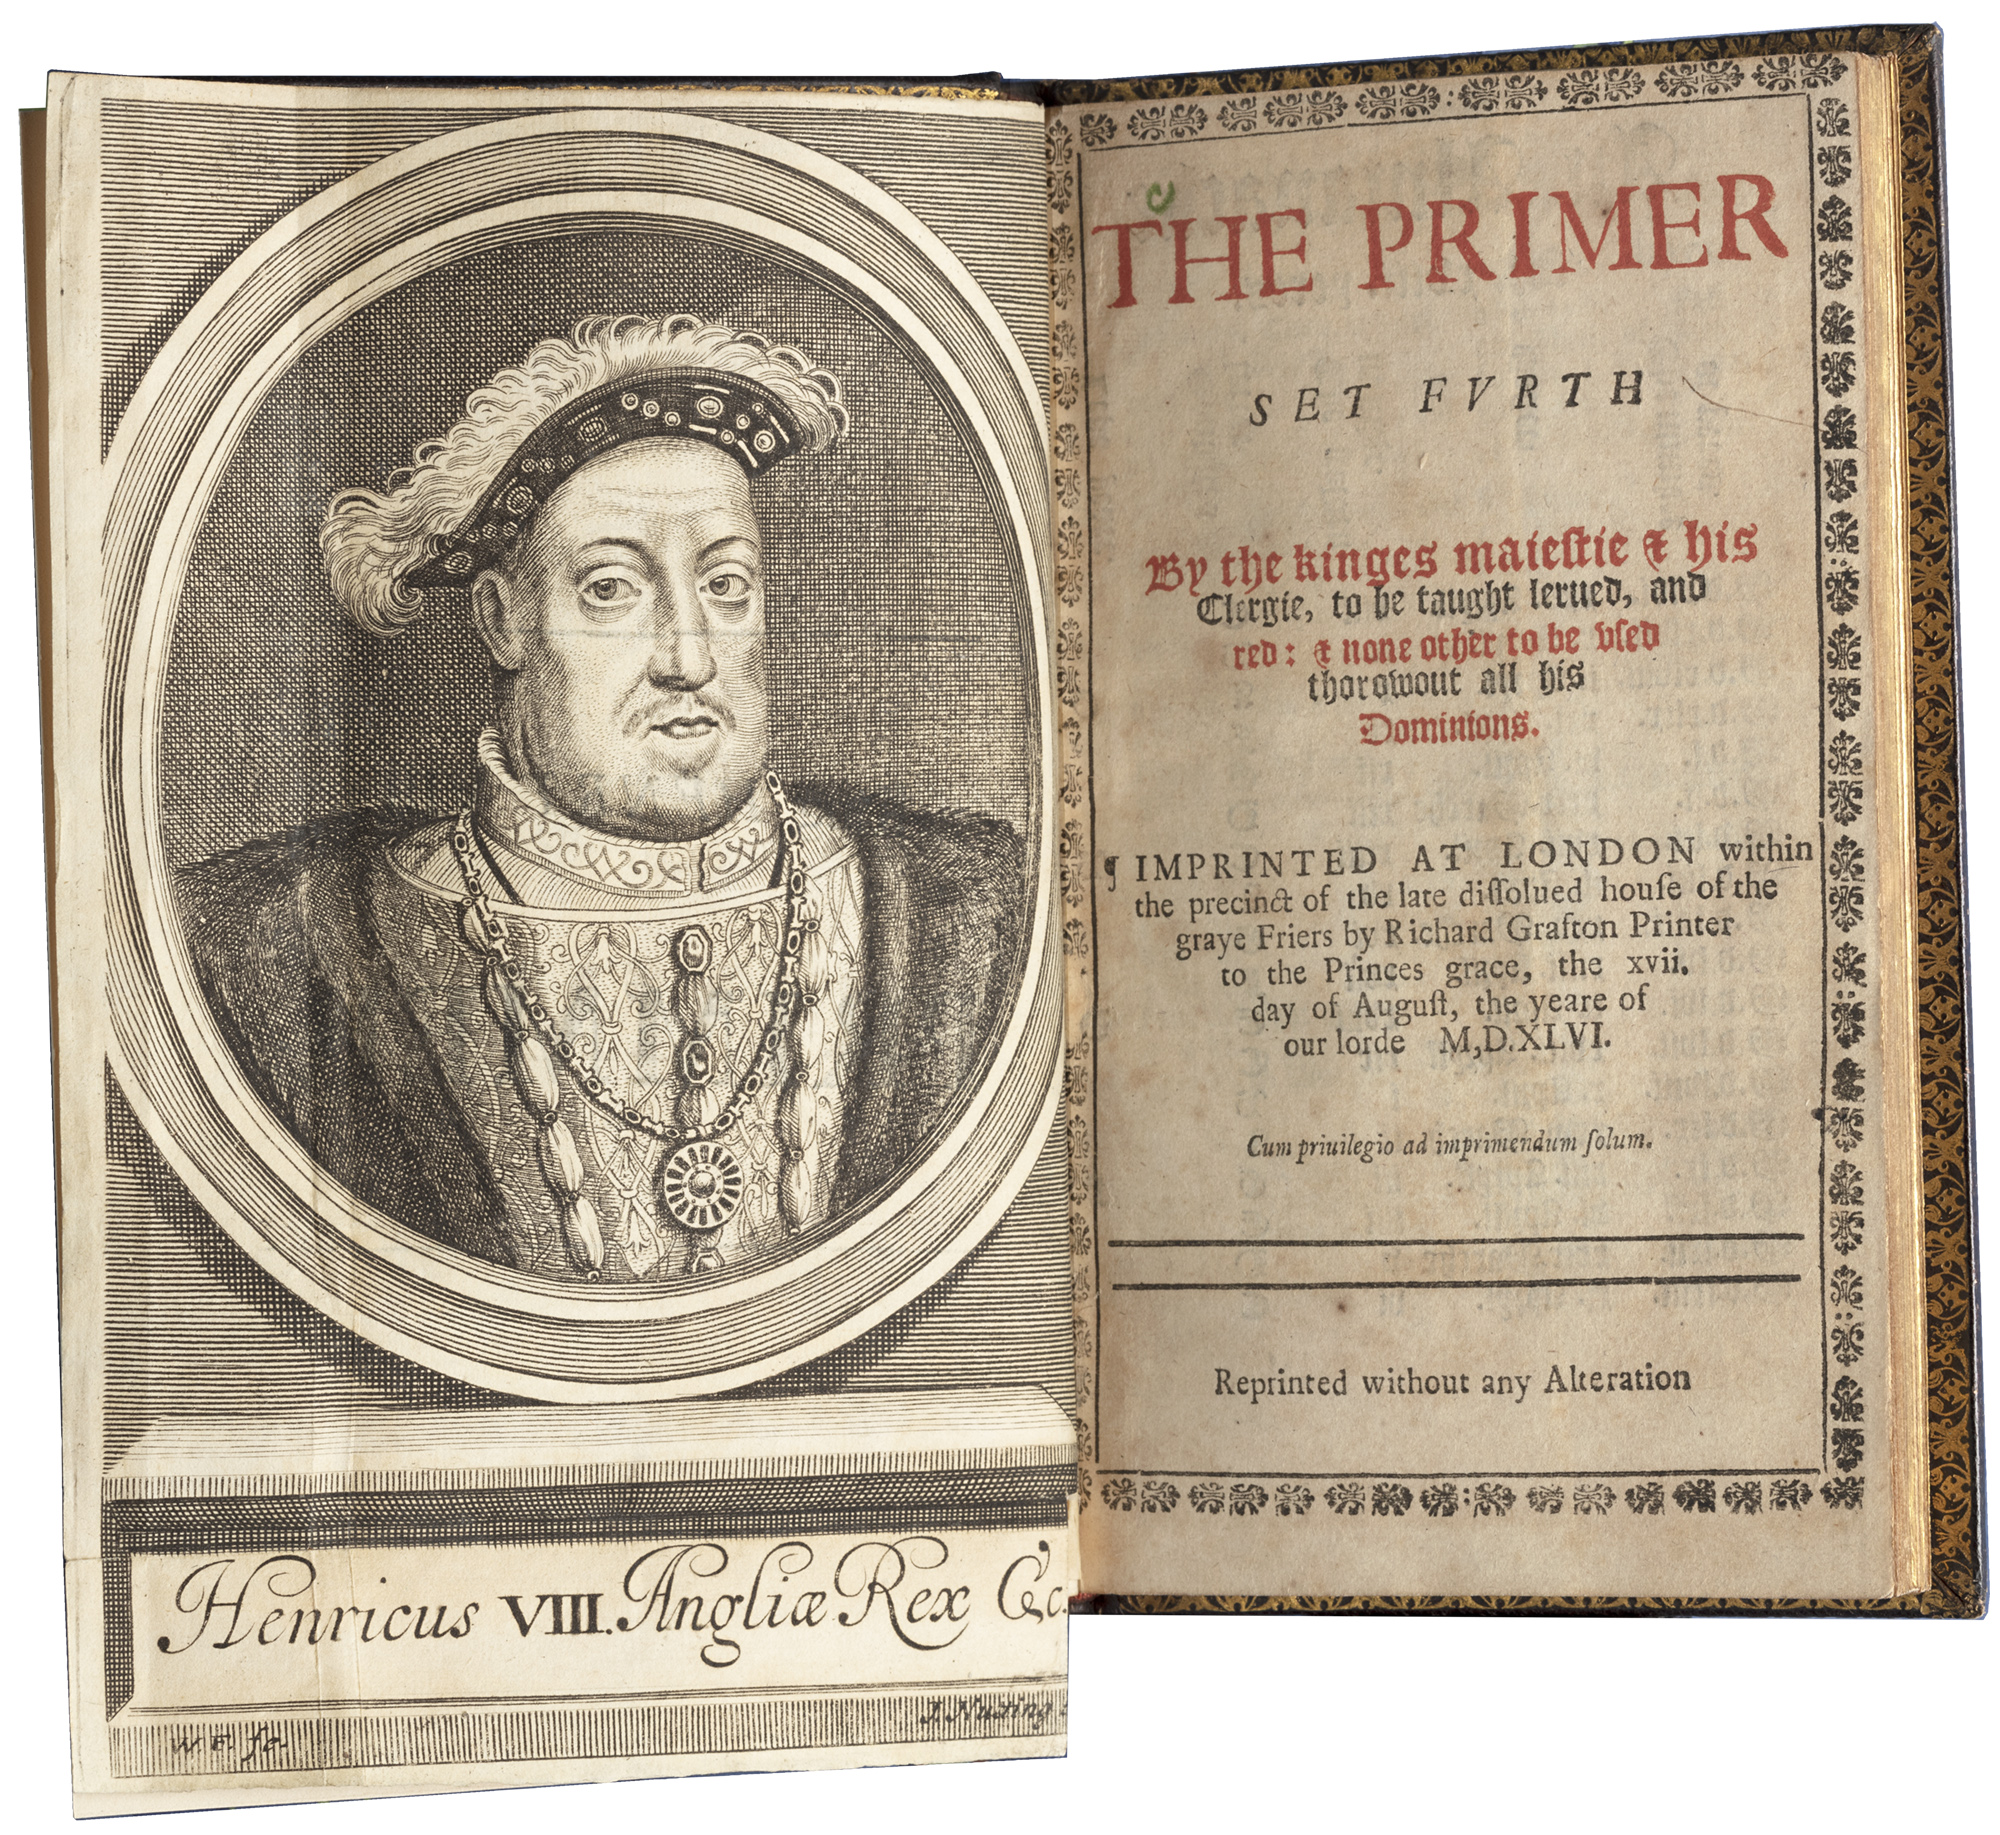 The primer set furth by the kinges maiestie & his Clergie ... 1546 (1710 reprint)